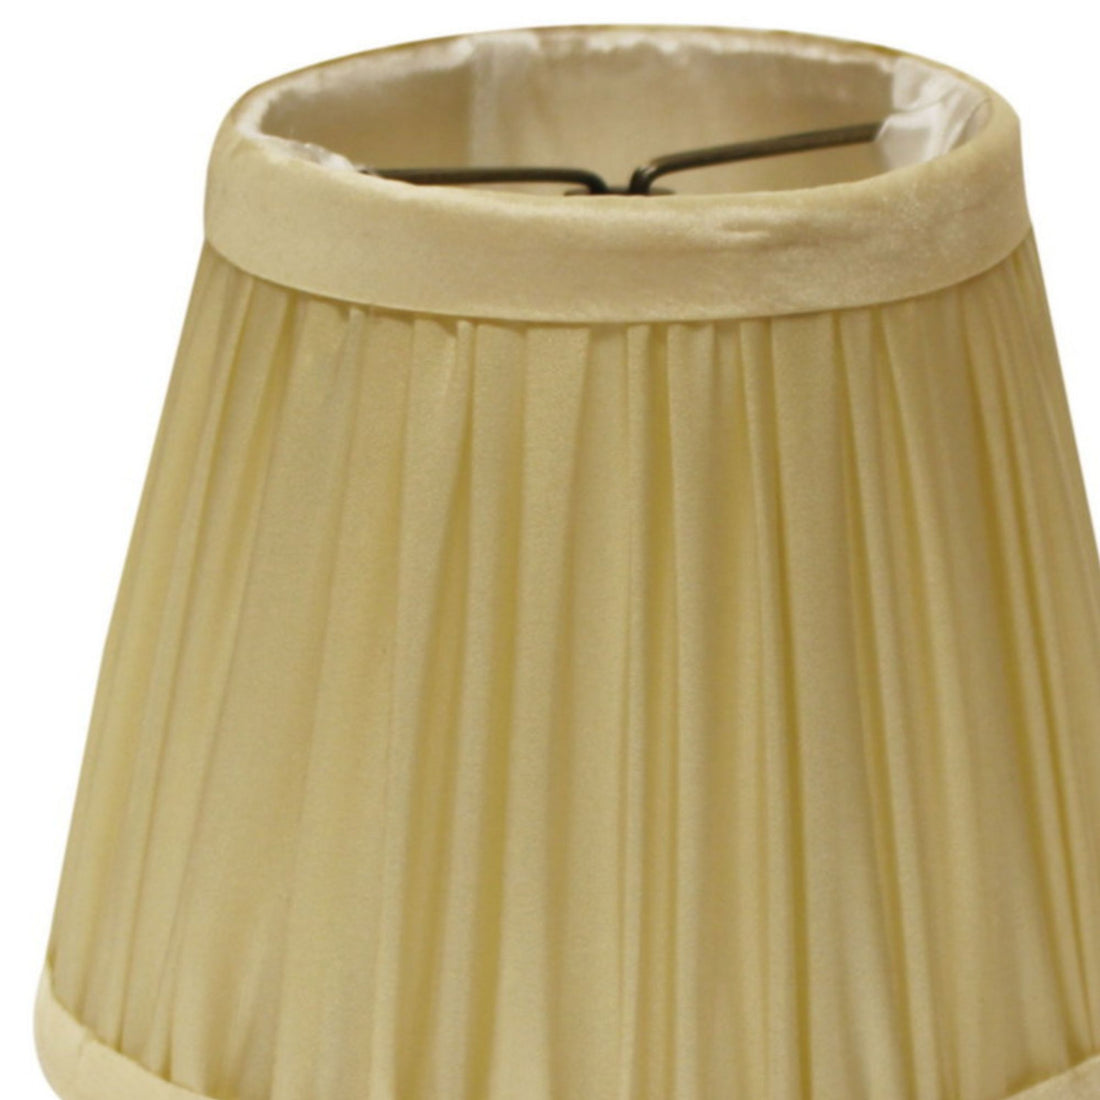 Slant Pencil Pleat Chandelier Lampshade with Flame natural-taffeta